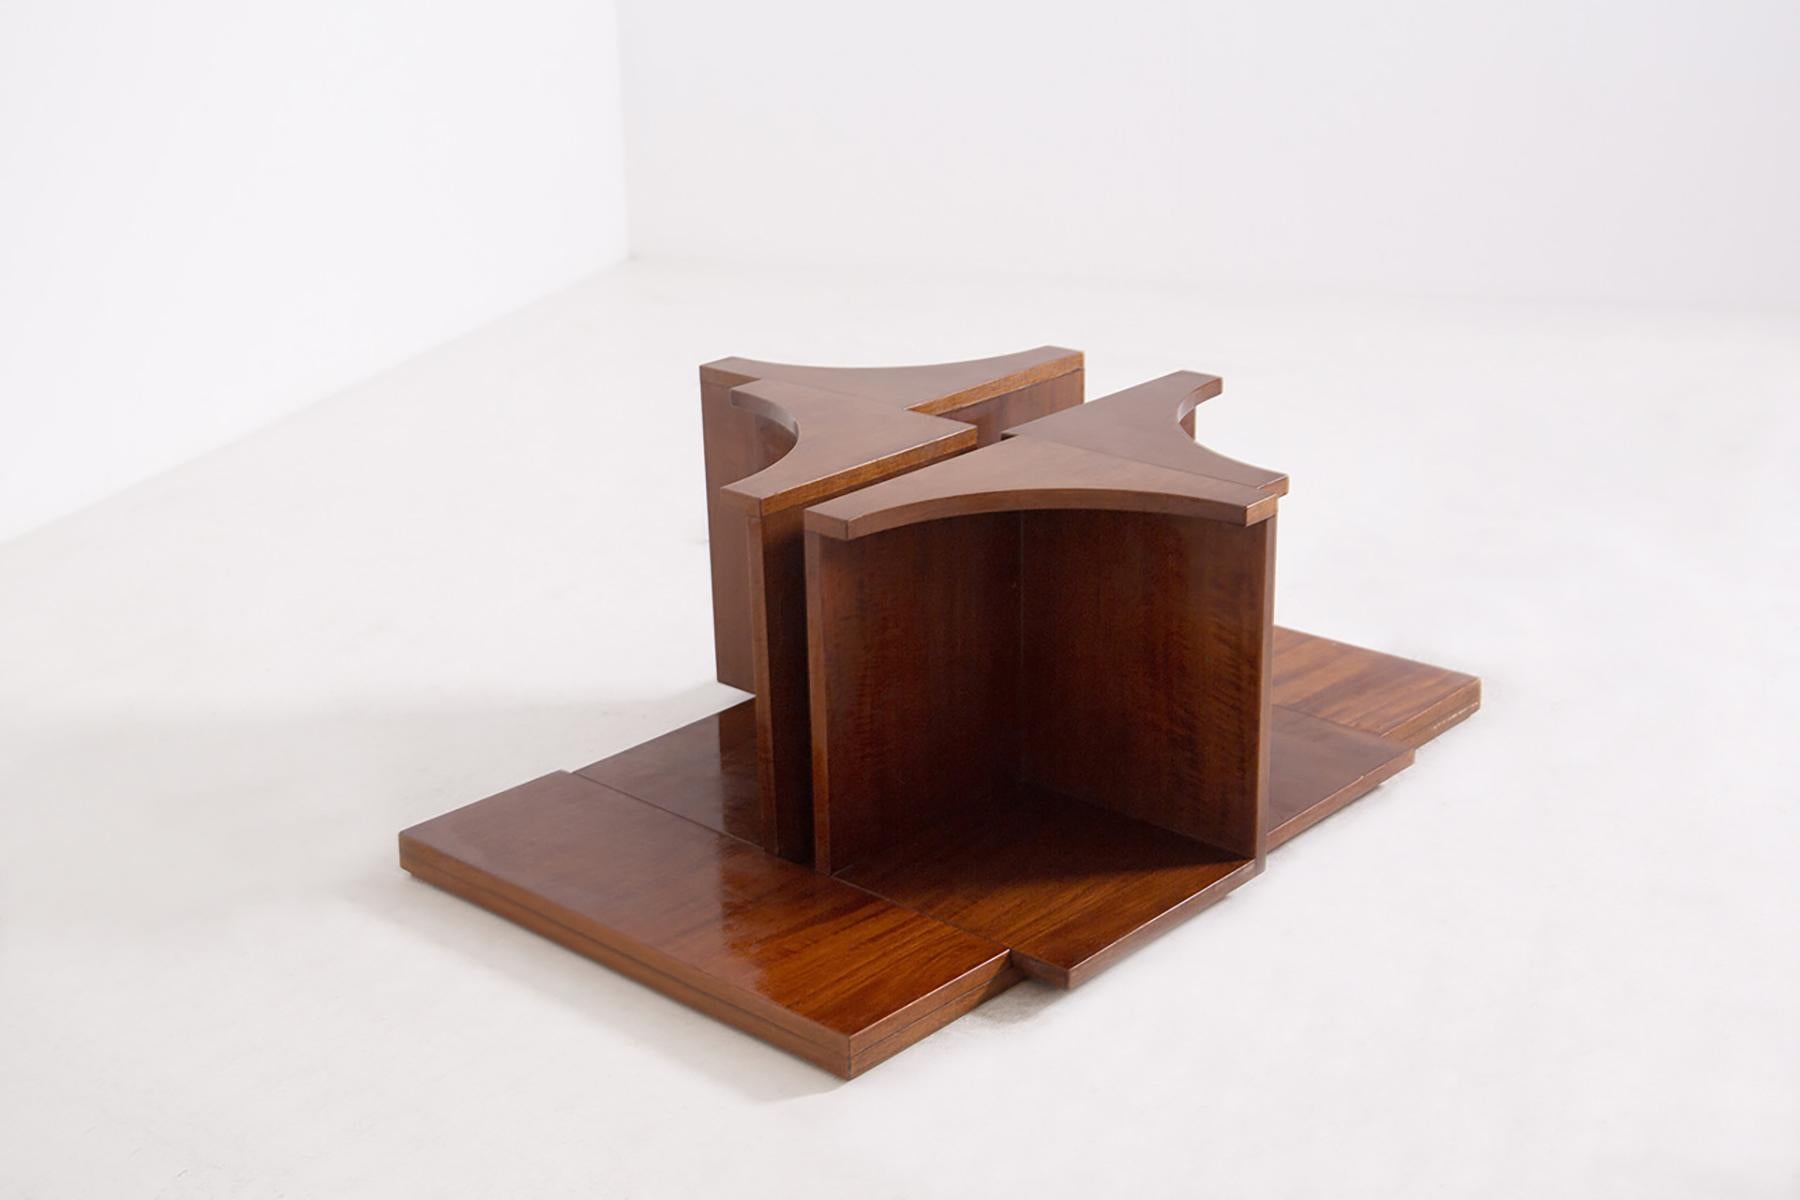 Very rare modular center table by Tytti Laurola made by Tonelli Broggi Cantù in 1967.
The center table is composed of four identical modular blocks in wood. The glass is original of the time.
The peculiarity of the center table is definitely its